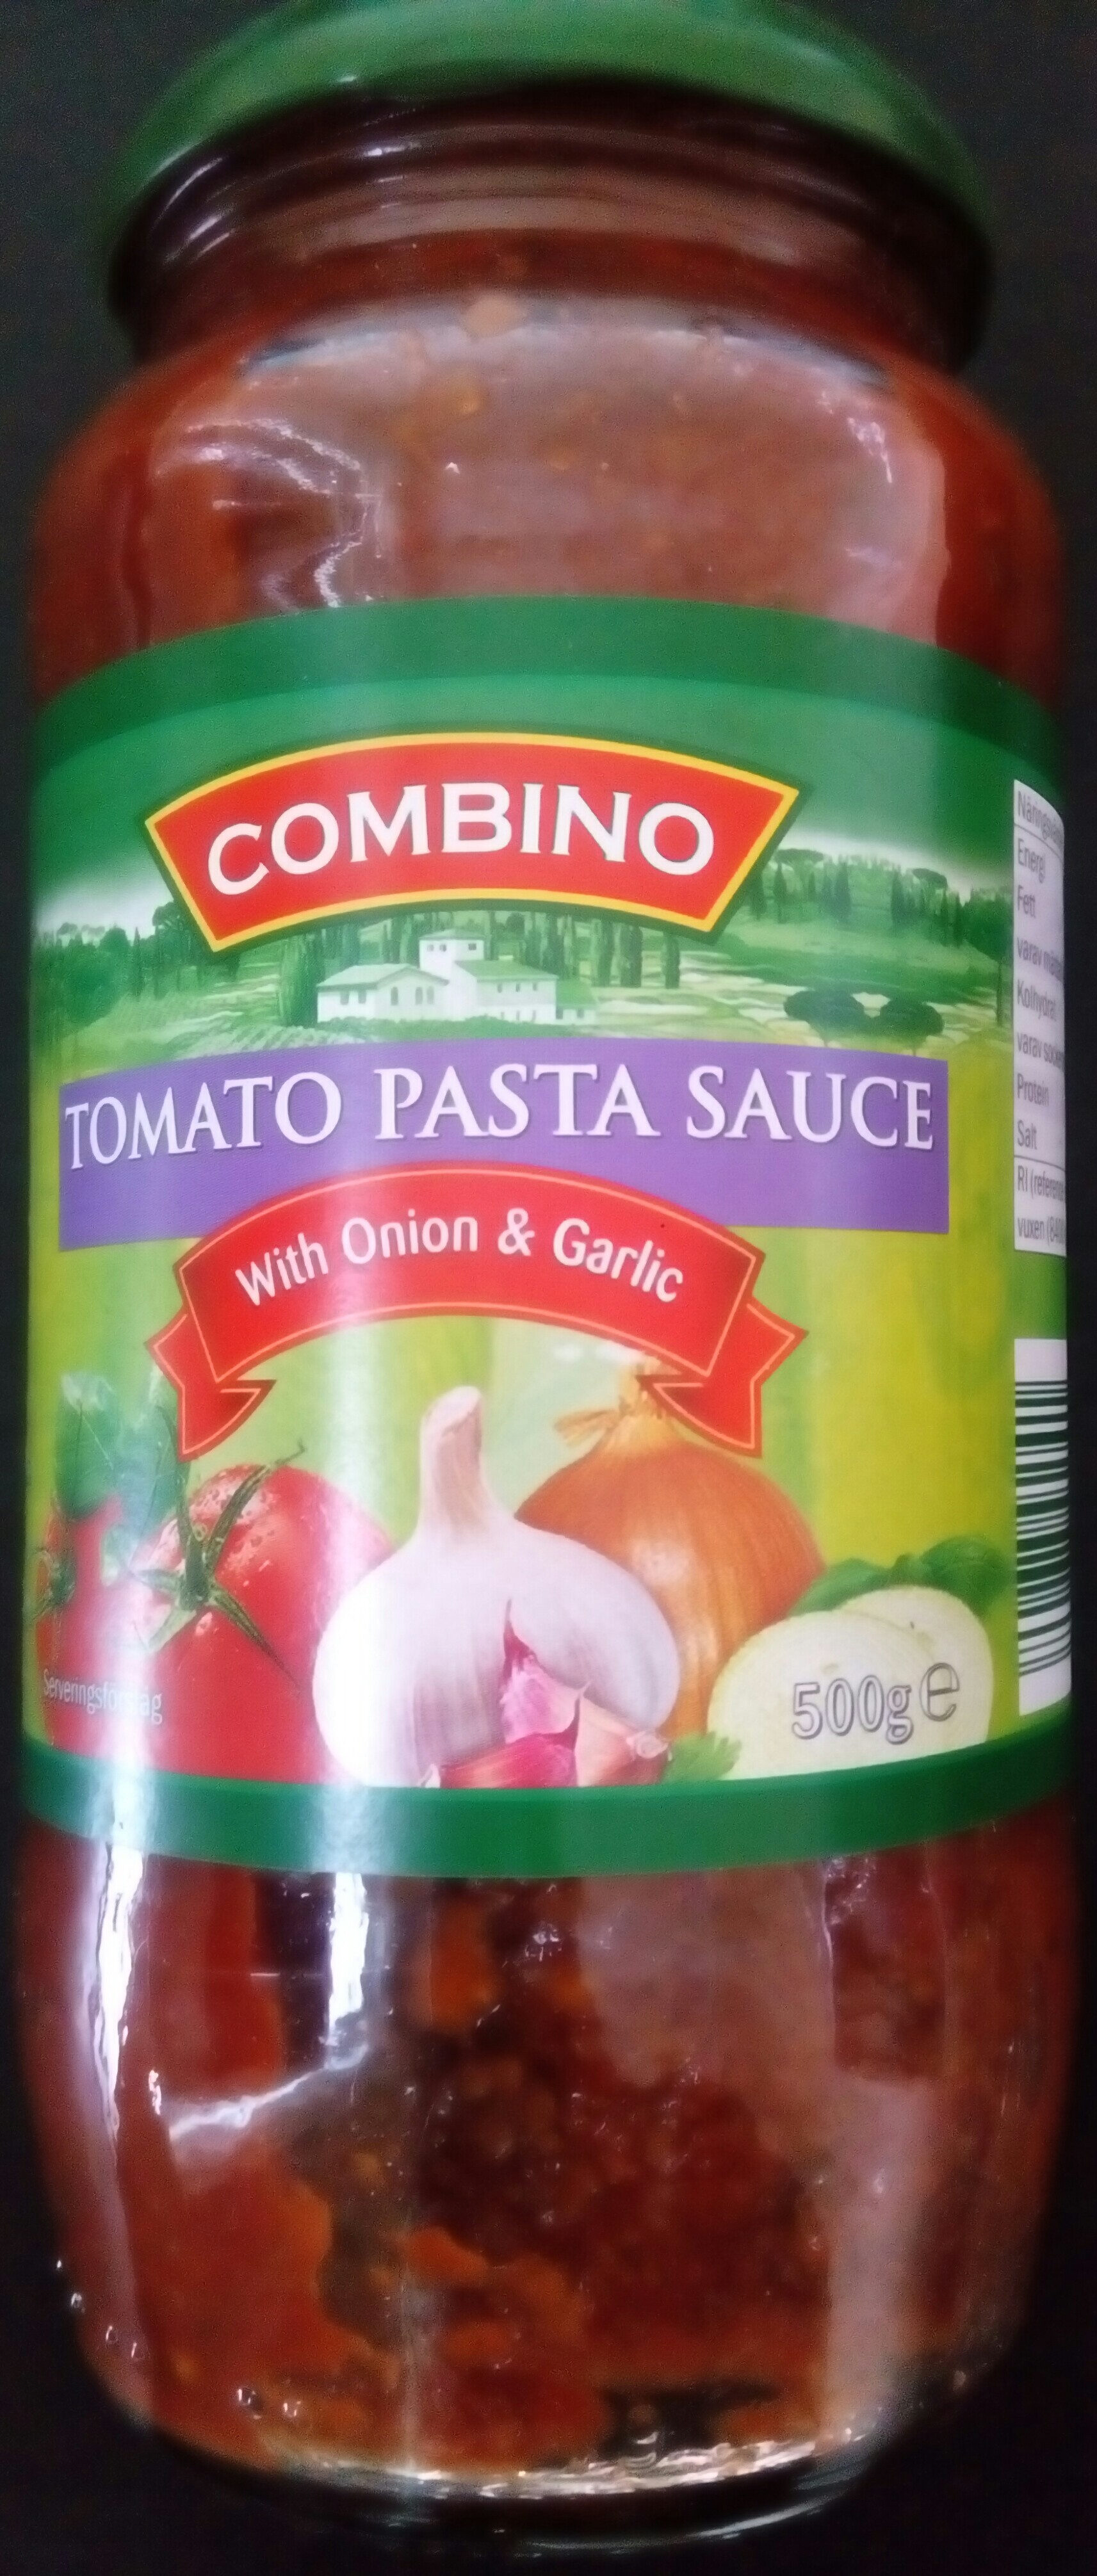 Tomato Pasta Sauce with onion and garlic - Produkt - sv